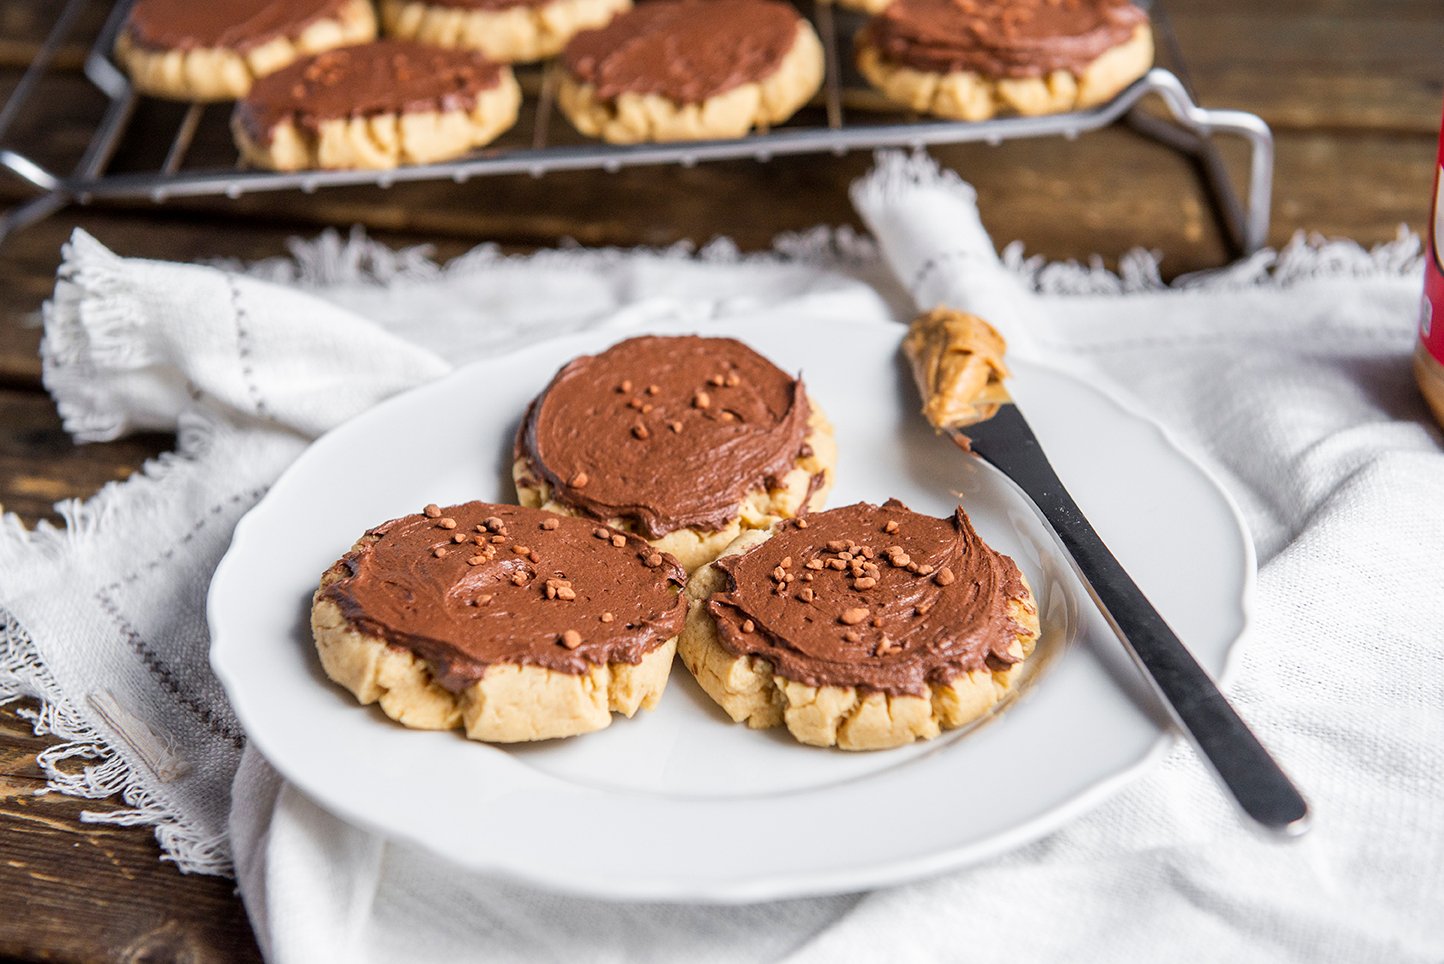 Frosted Peanut Butter Sugar Cookies with Chocolate & Peanut Butter Frosting